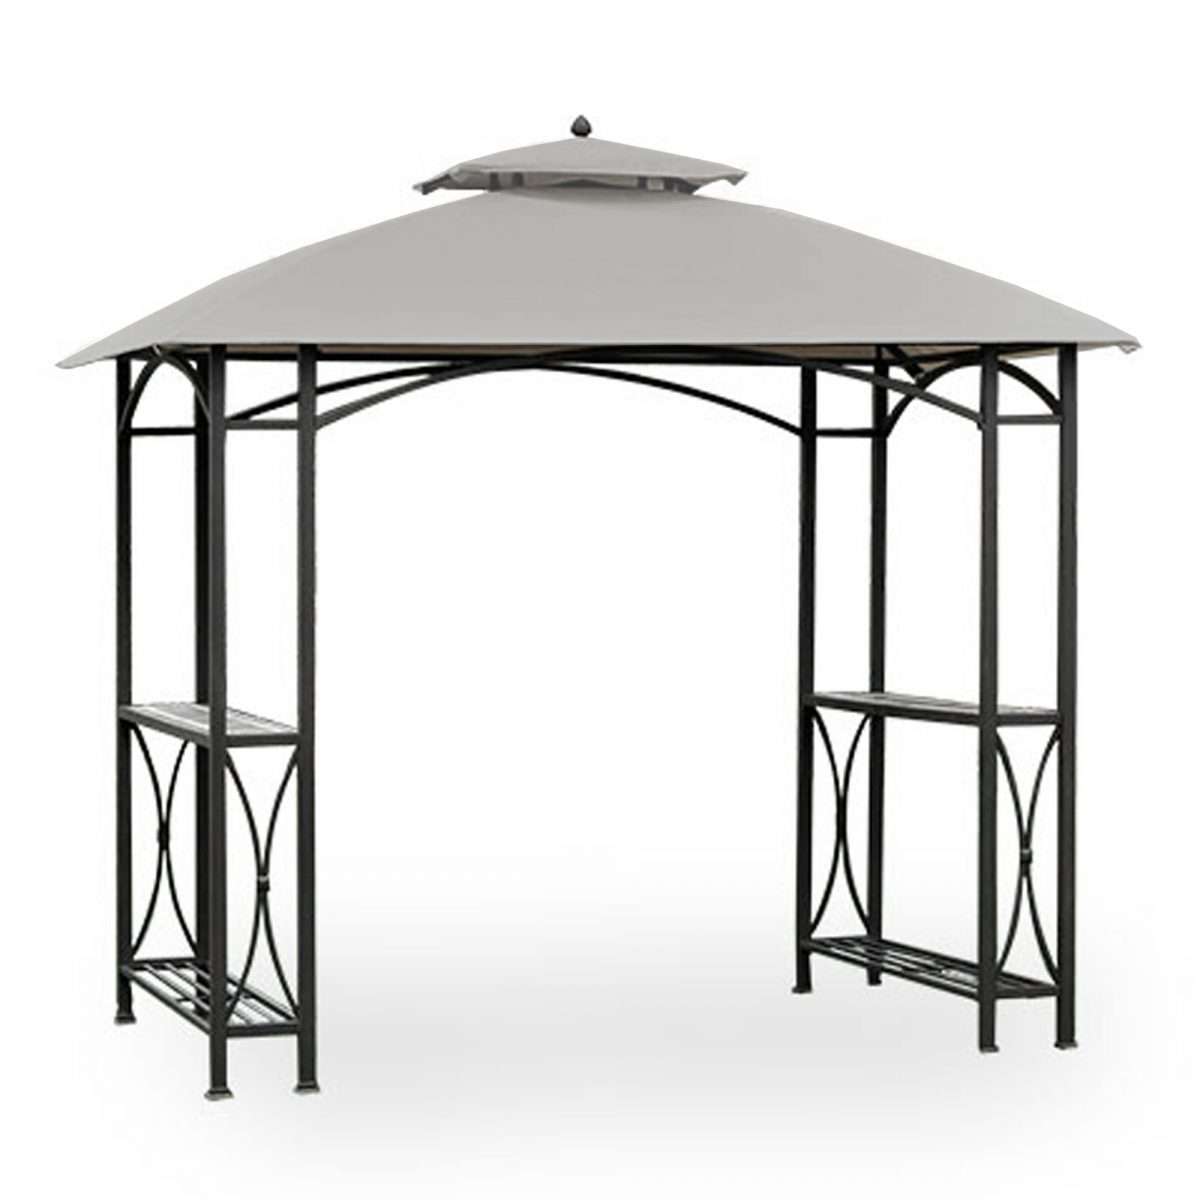 Garden Winds Replacement Canopy Top Cover for the Sheridan Grill Gazebo ...